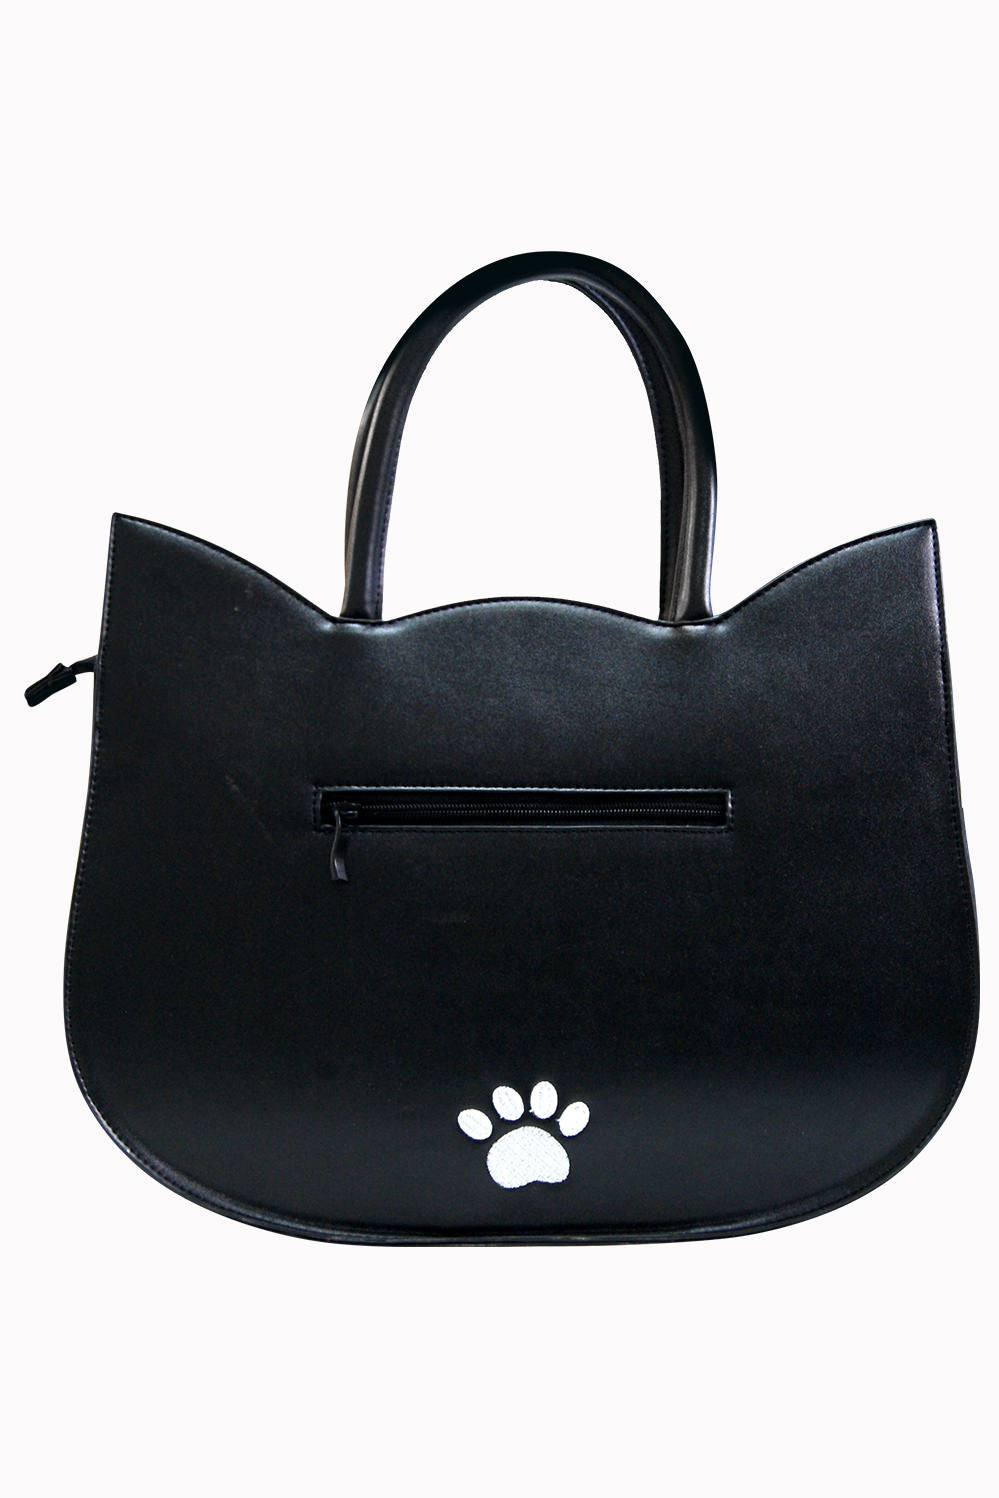 Large cat head shaped hand bag with paw print on back